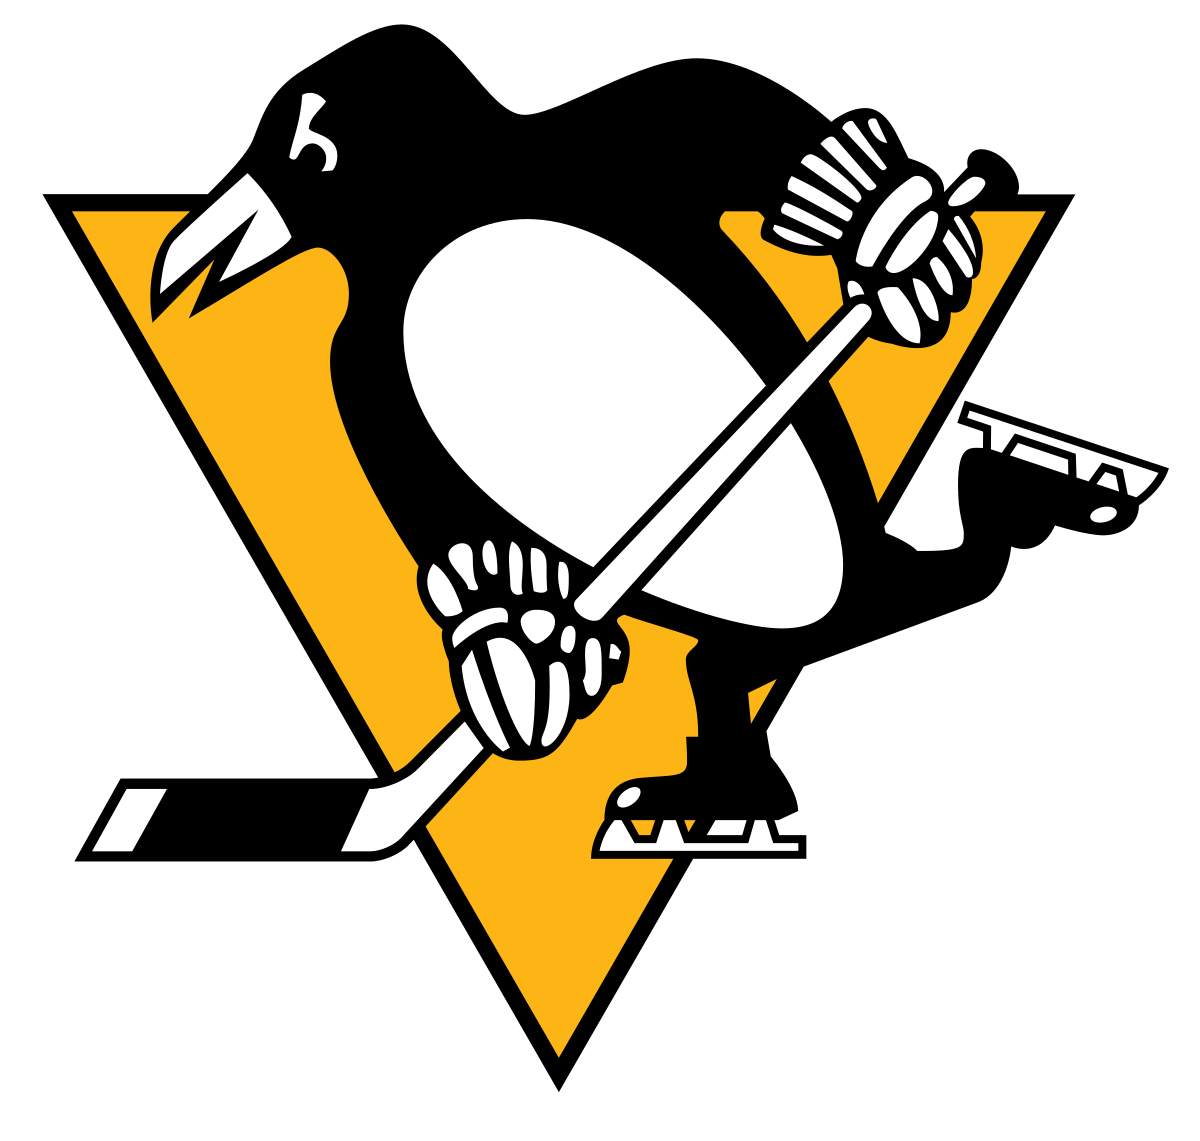 Hockey clipart symbol. Pittsburgh penguins wikipedia coolers